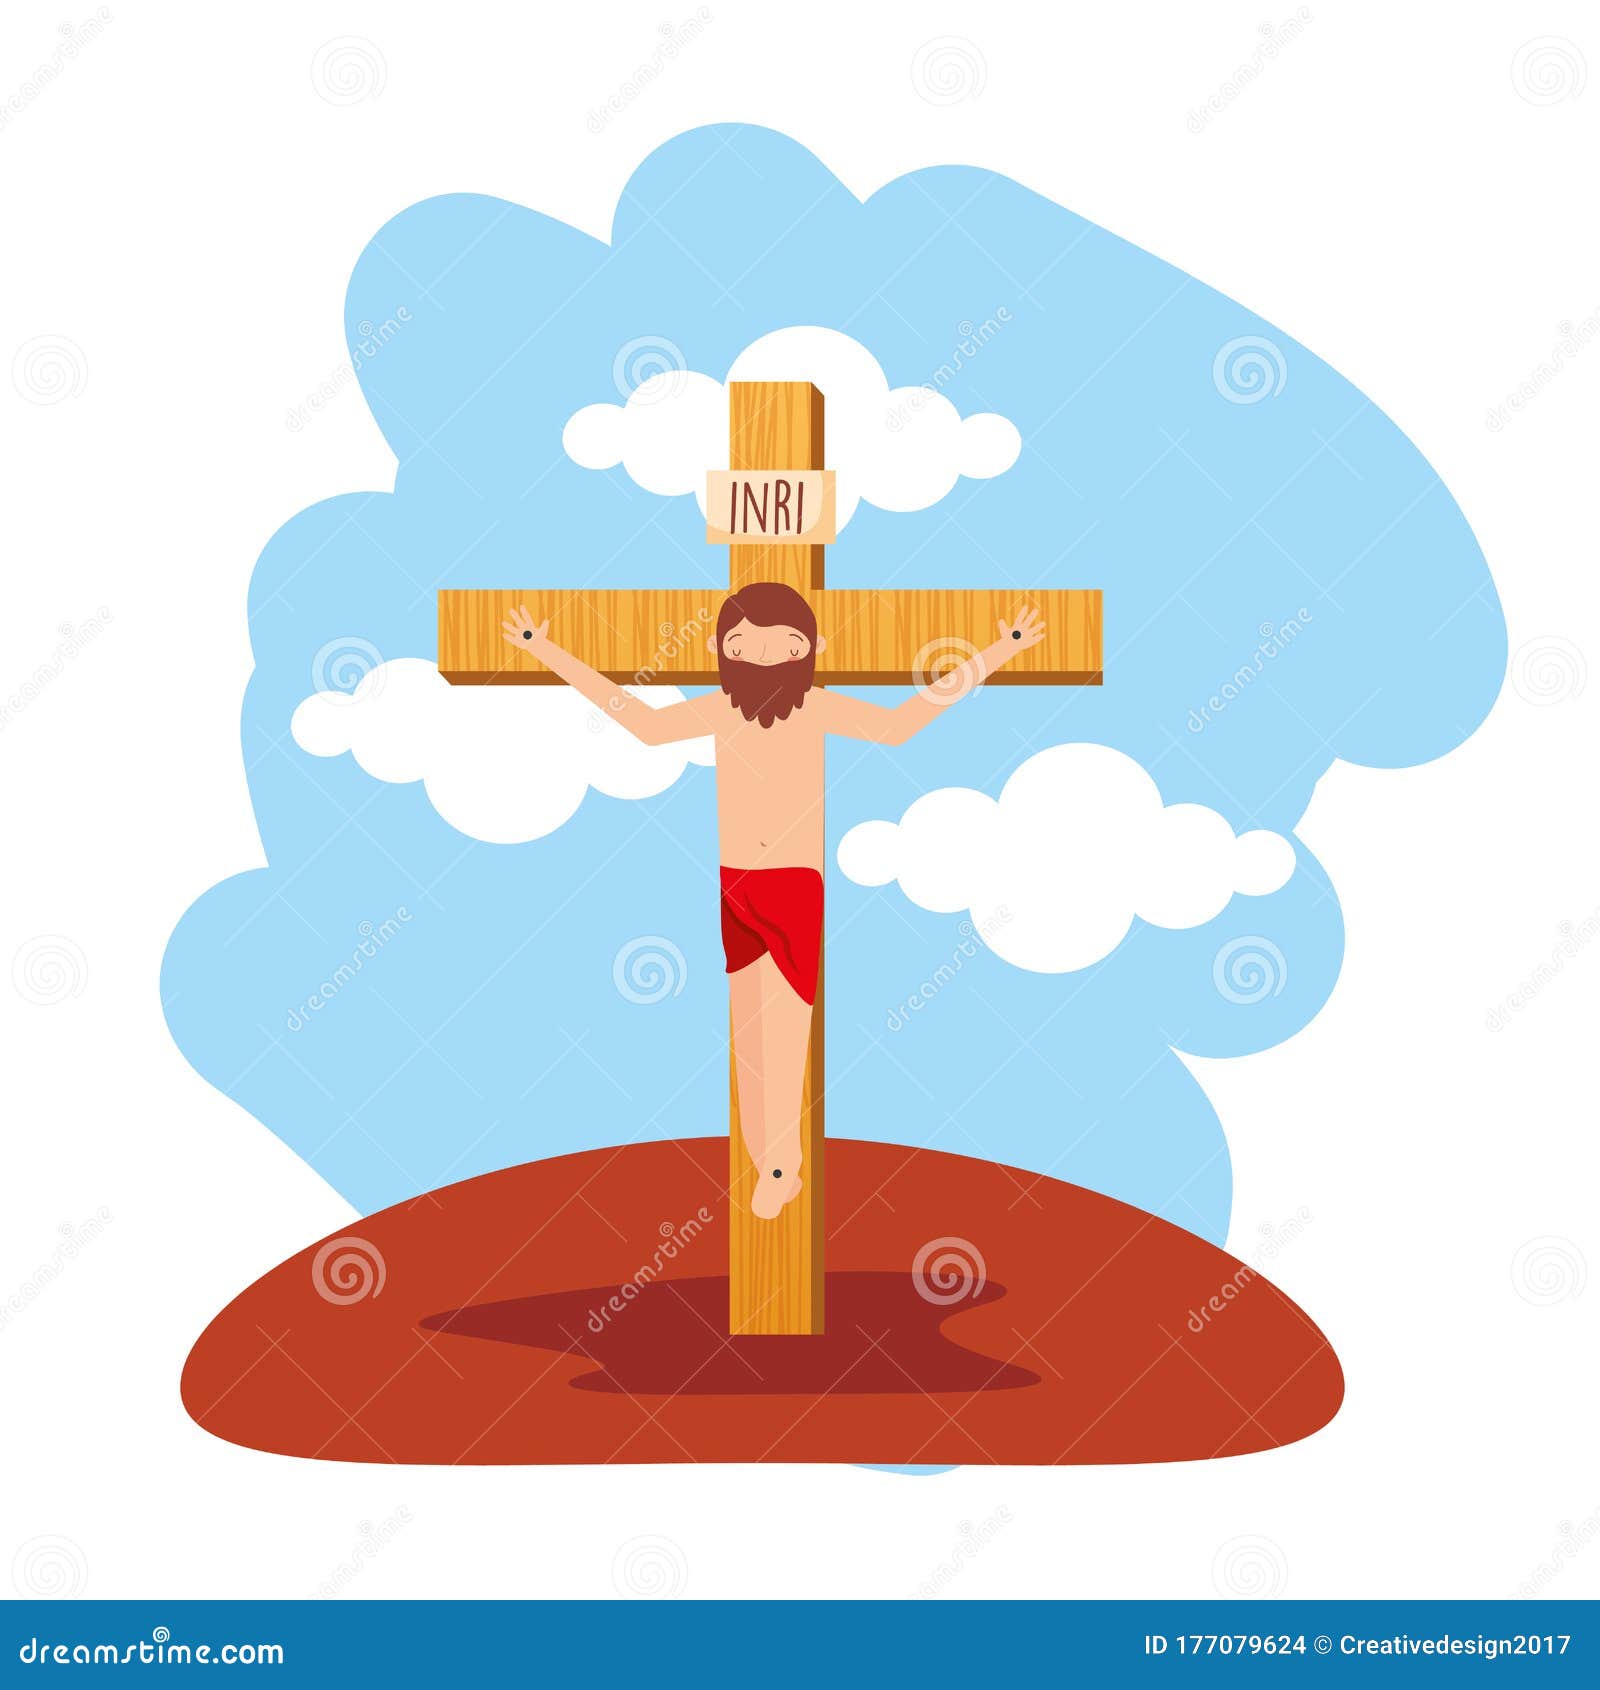 Crucified Jesus Cartoon Stock Illustrations – 50 Crucified Jesus Cartoon  Stock Illustrations, Vectors & Clipart - Dreamstime